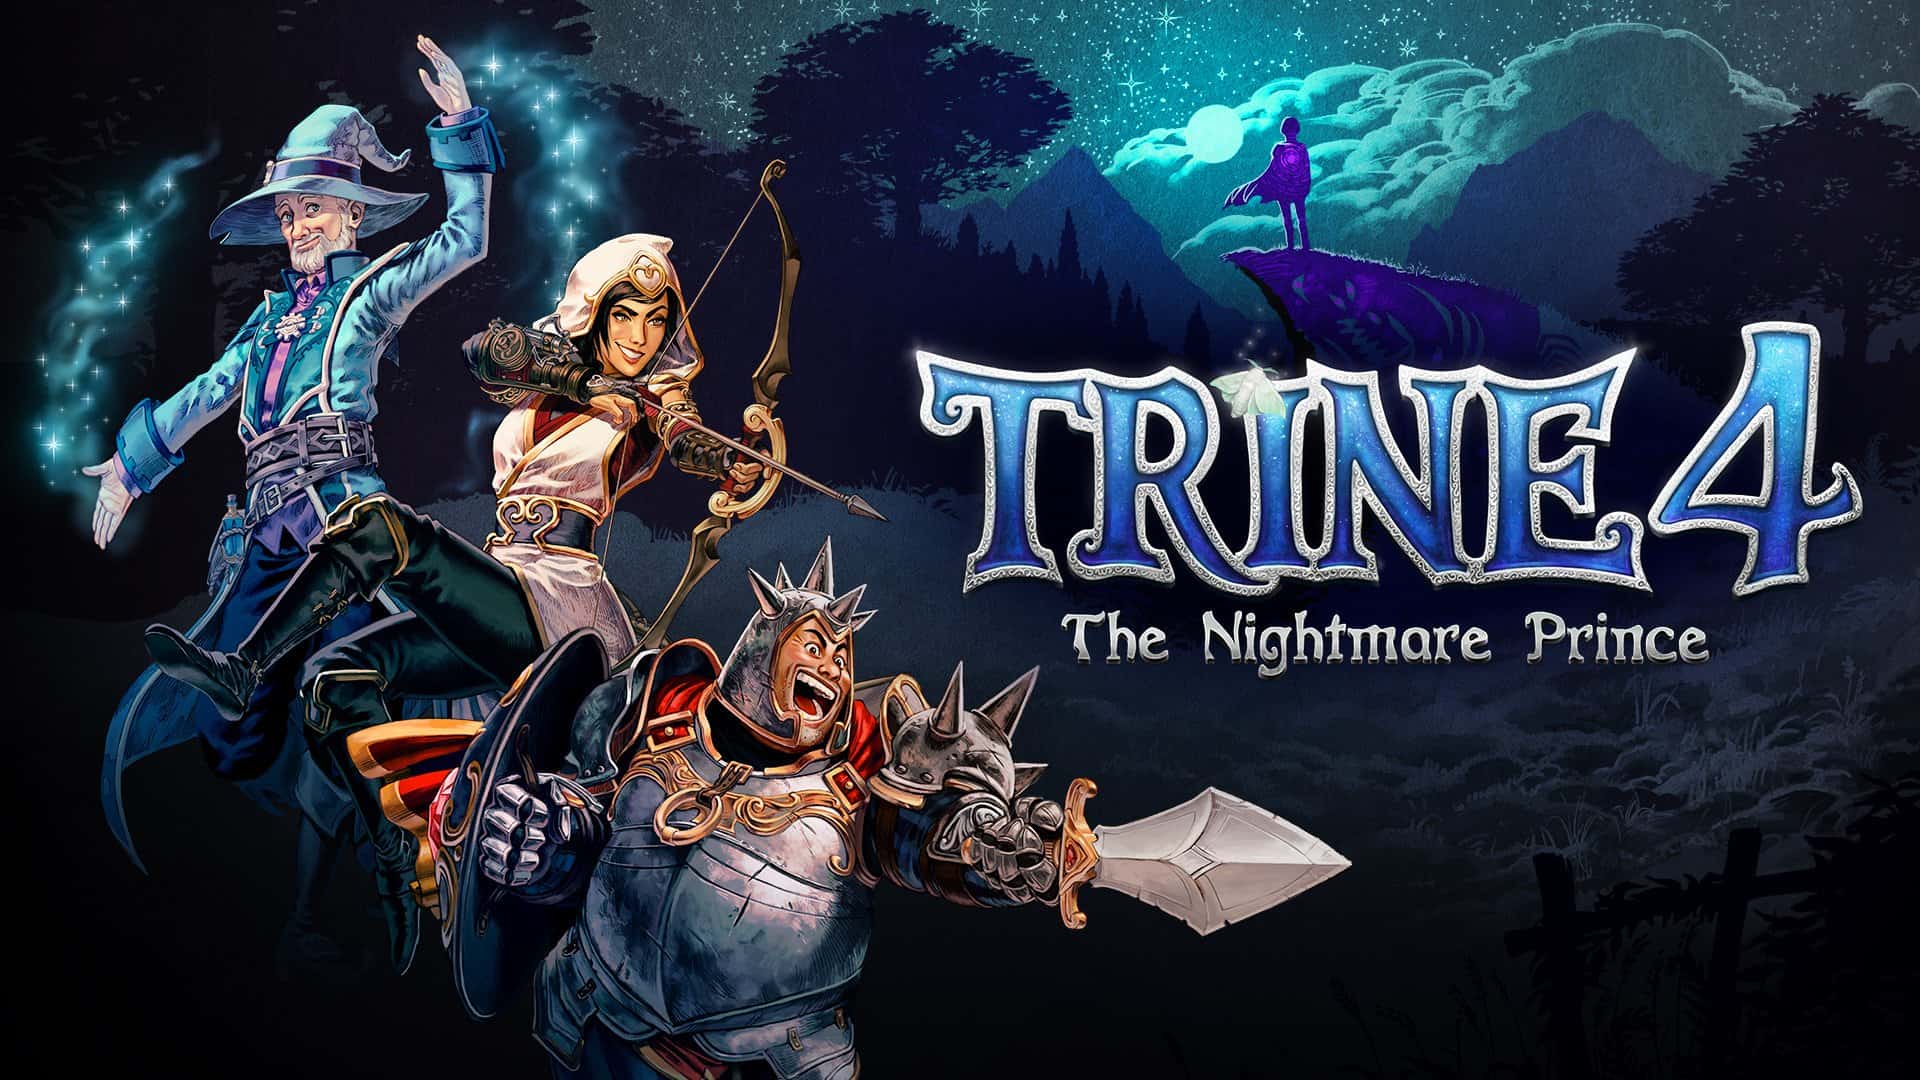 Trine 4: The Nightmare Prince Arrives October 8th, New Gameplay Trailer Reveals Gorgeous New Footage